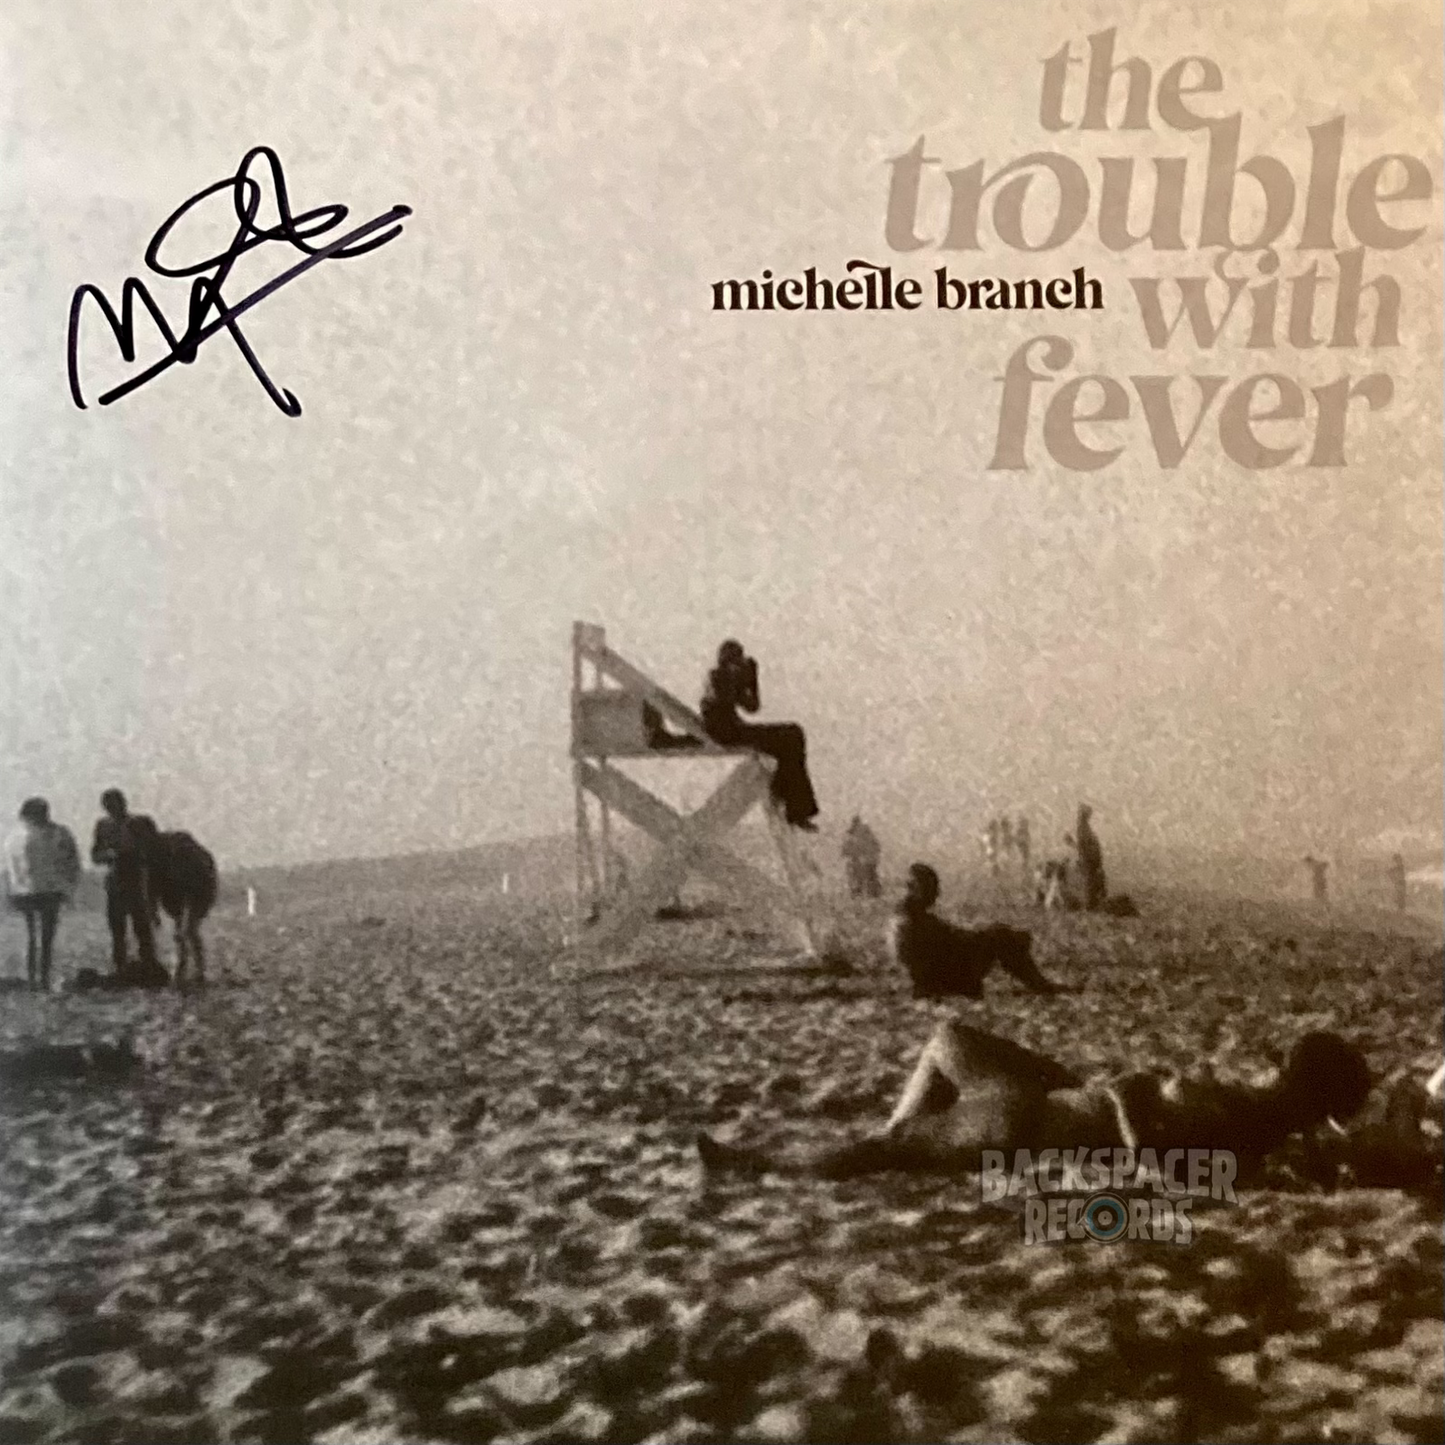 Michelle Branch - The Trouble With Fever LP (Signed)